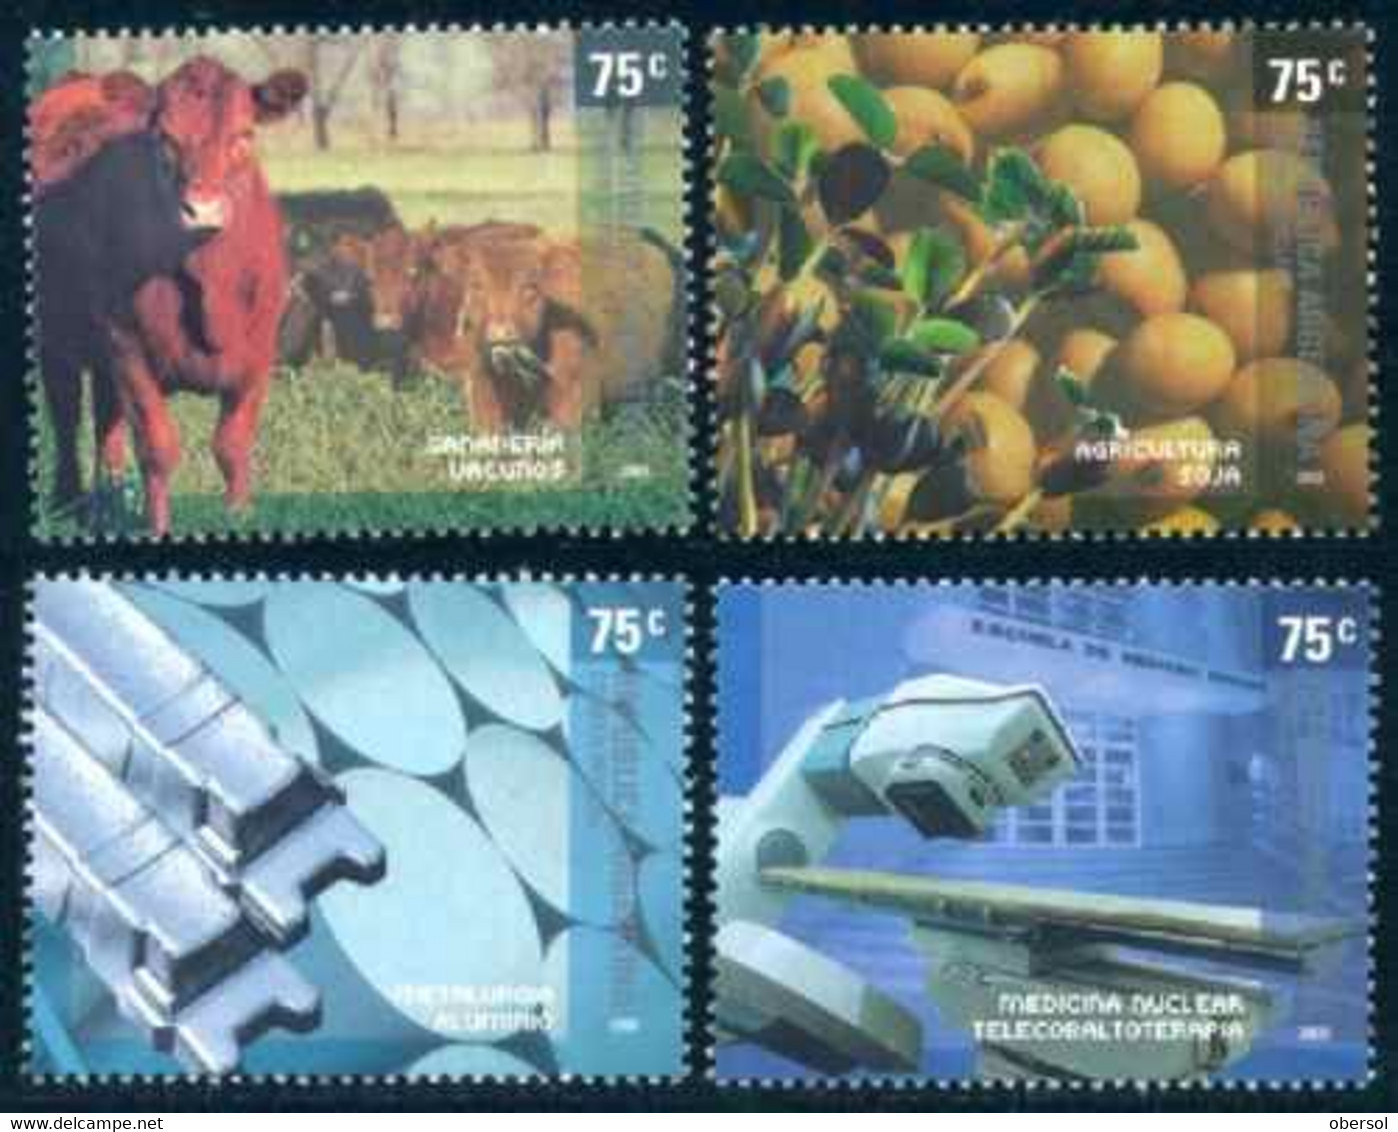 Argentina 2003 Technology, Industrie, Production Complete Set Of 4 Values MNH - Neufs